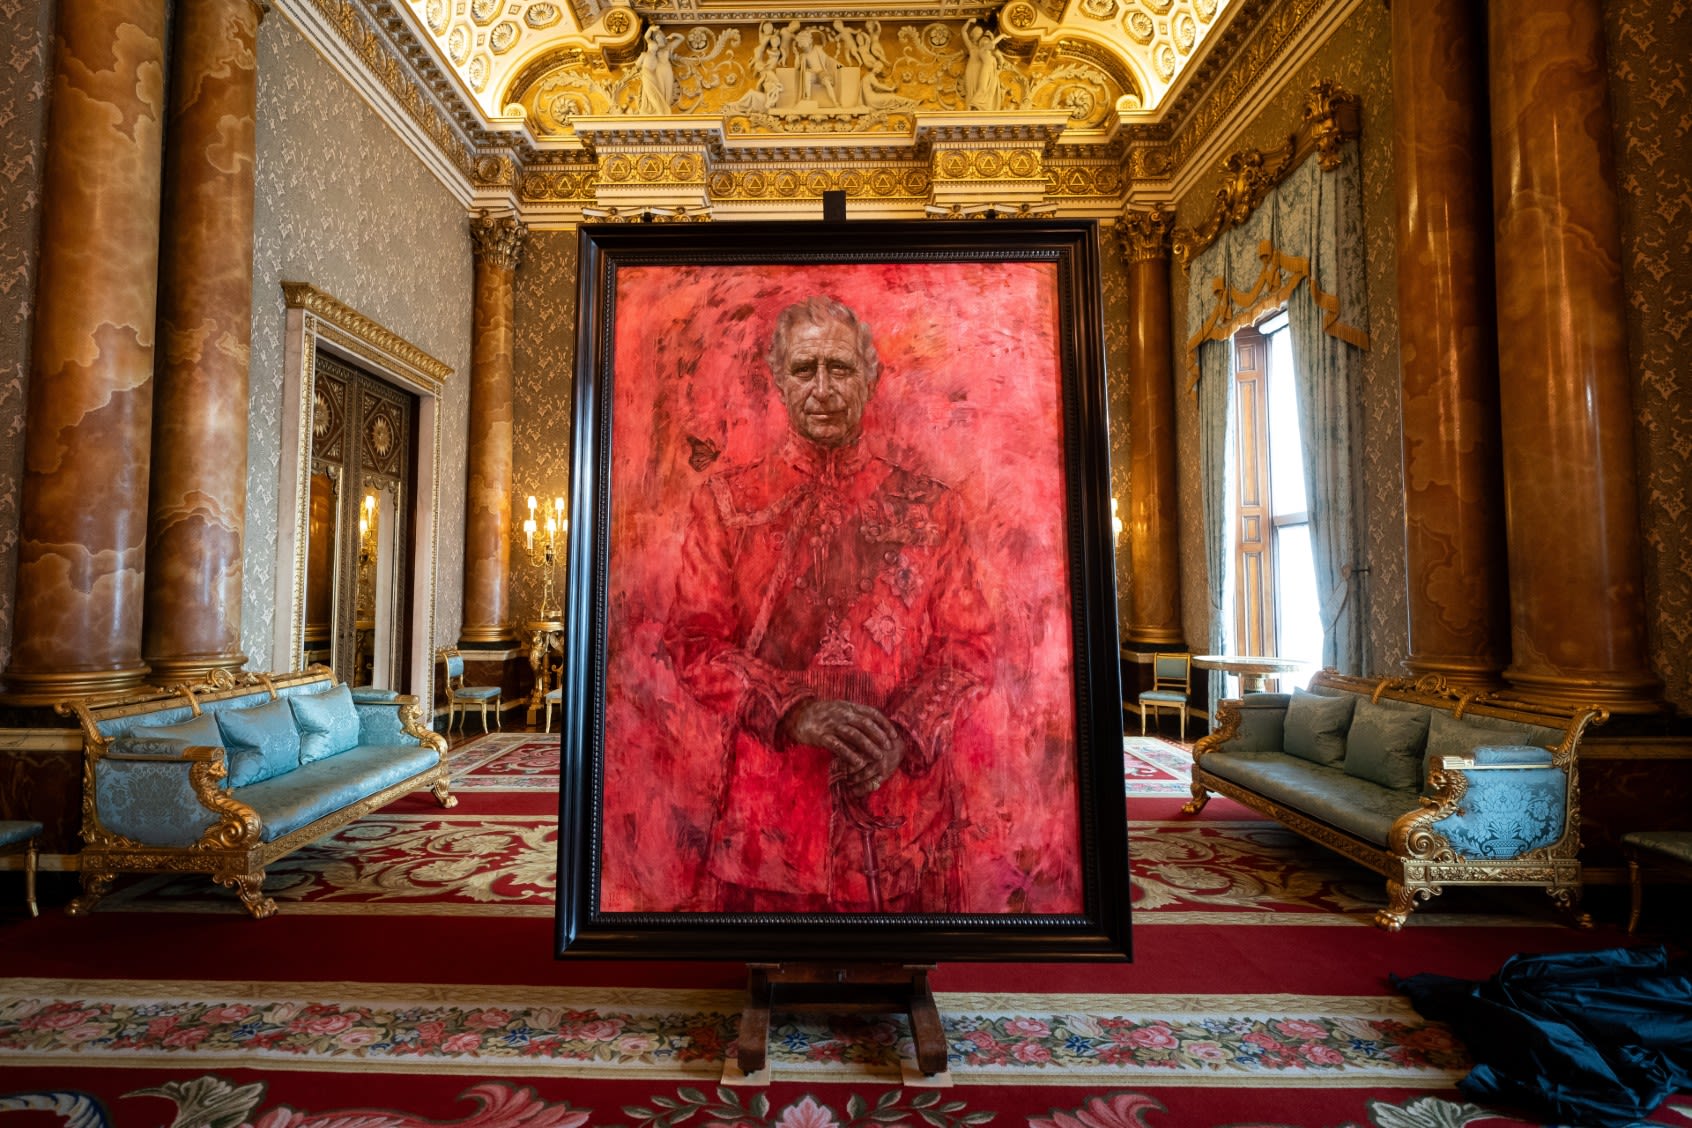 "Bathing in blood" portrait of King Charles III draws mixed reactions